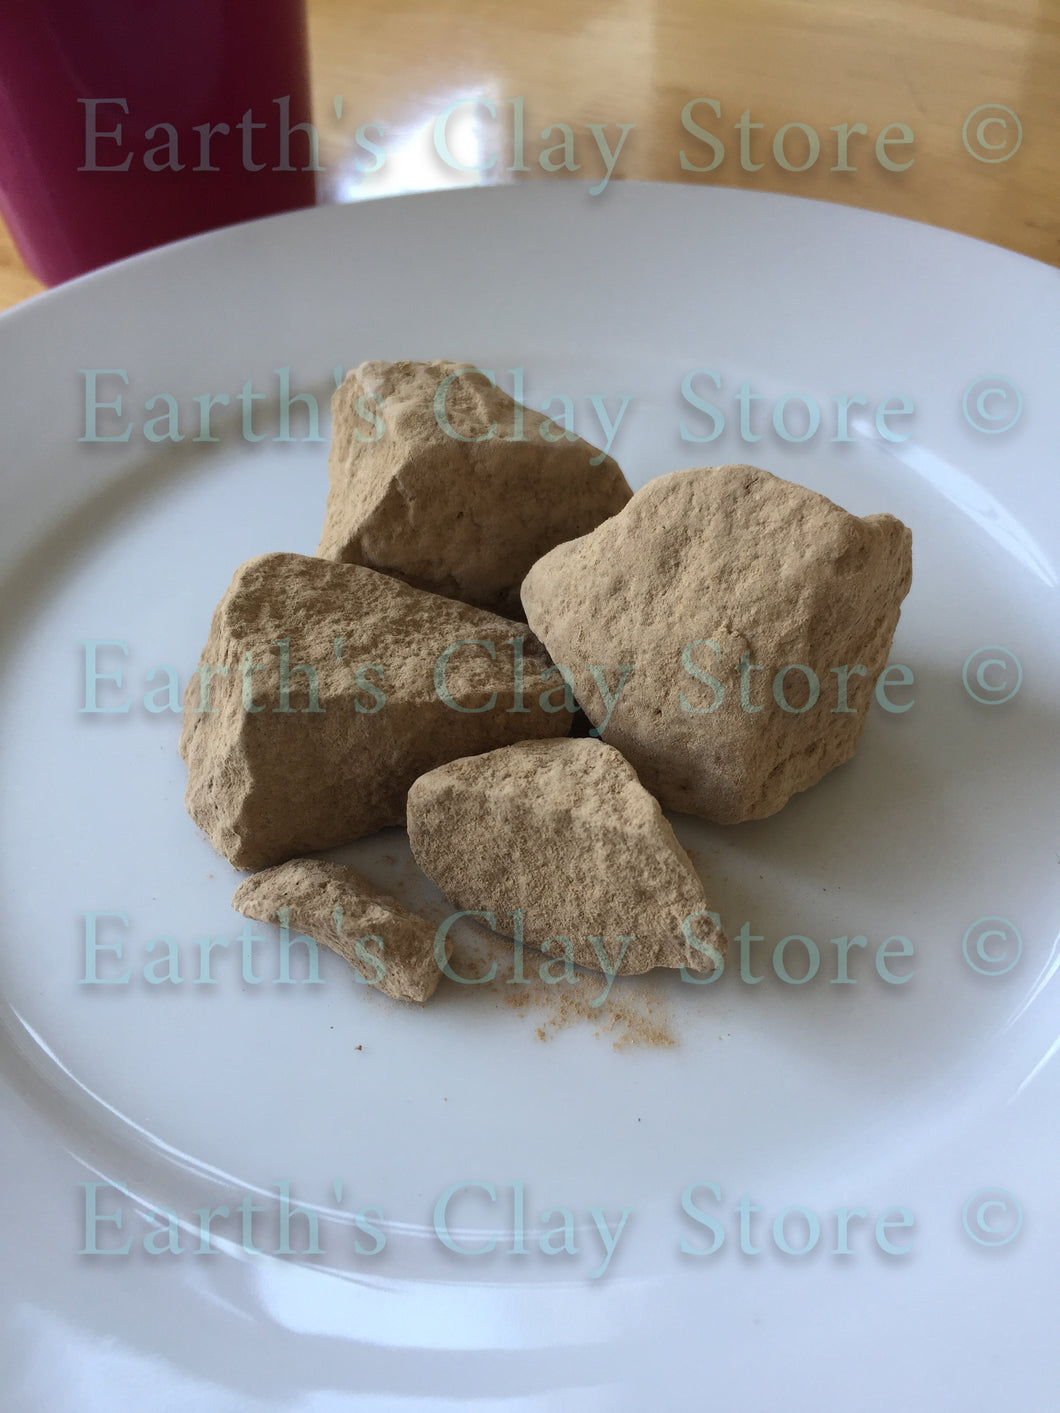 Chinese Loess Clay – Earth's Clay Store